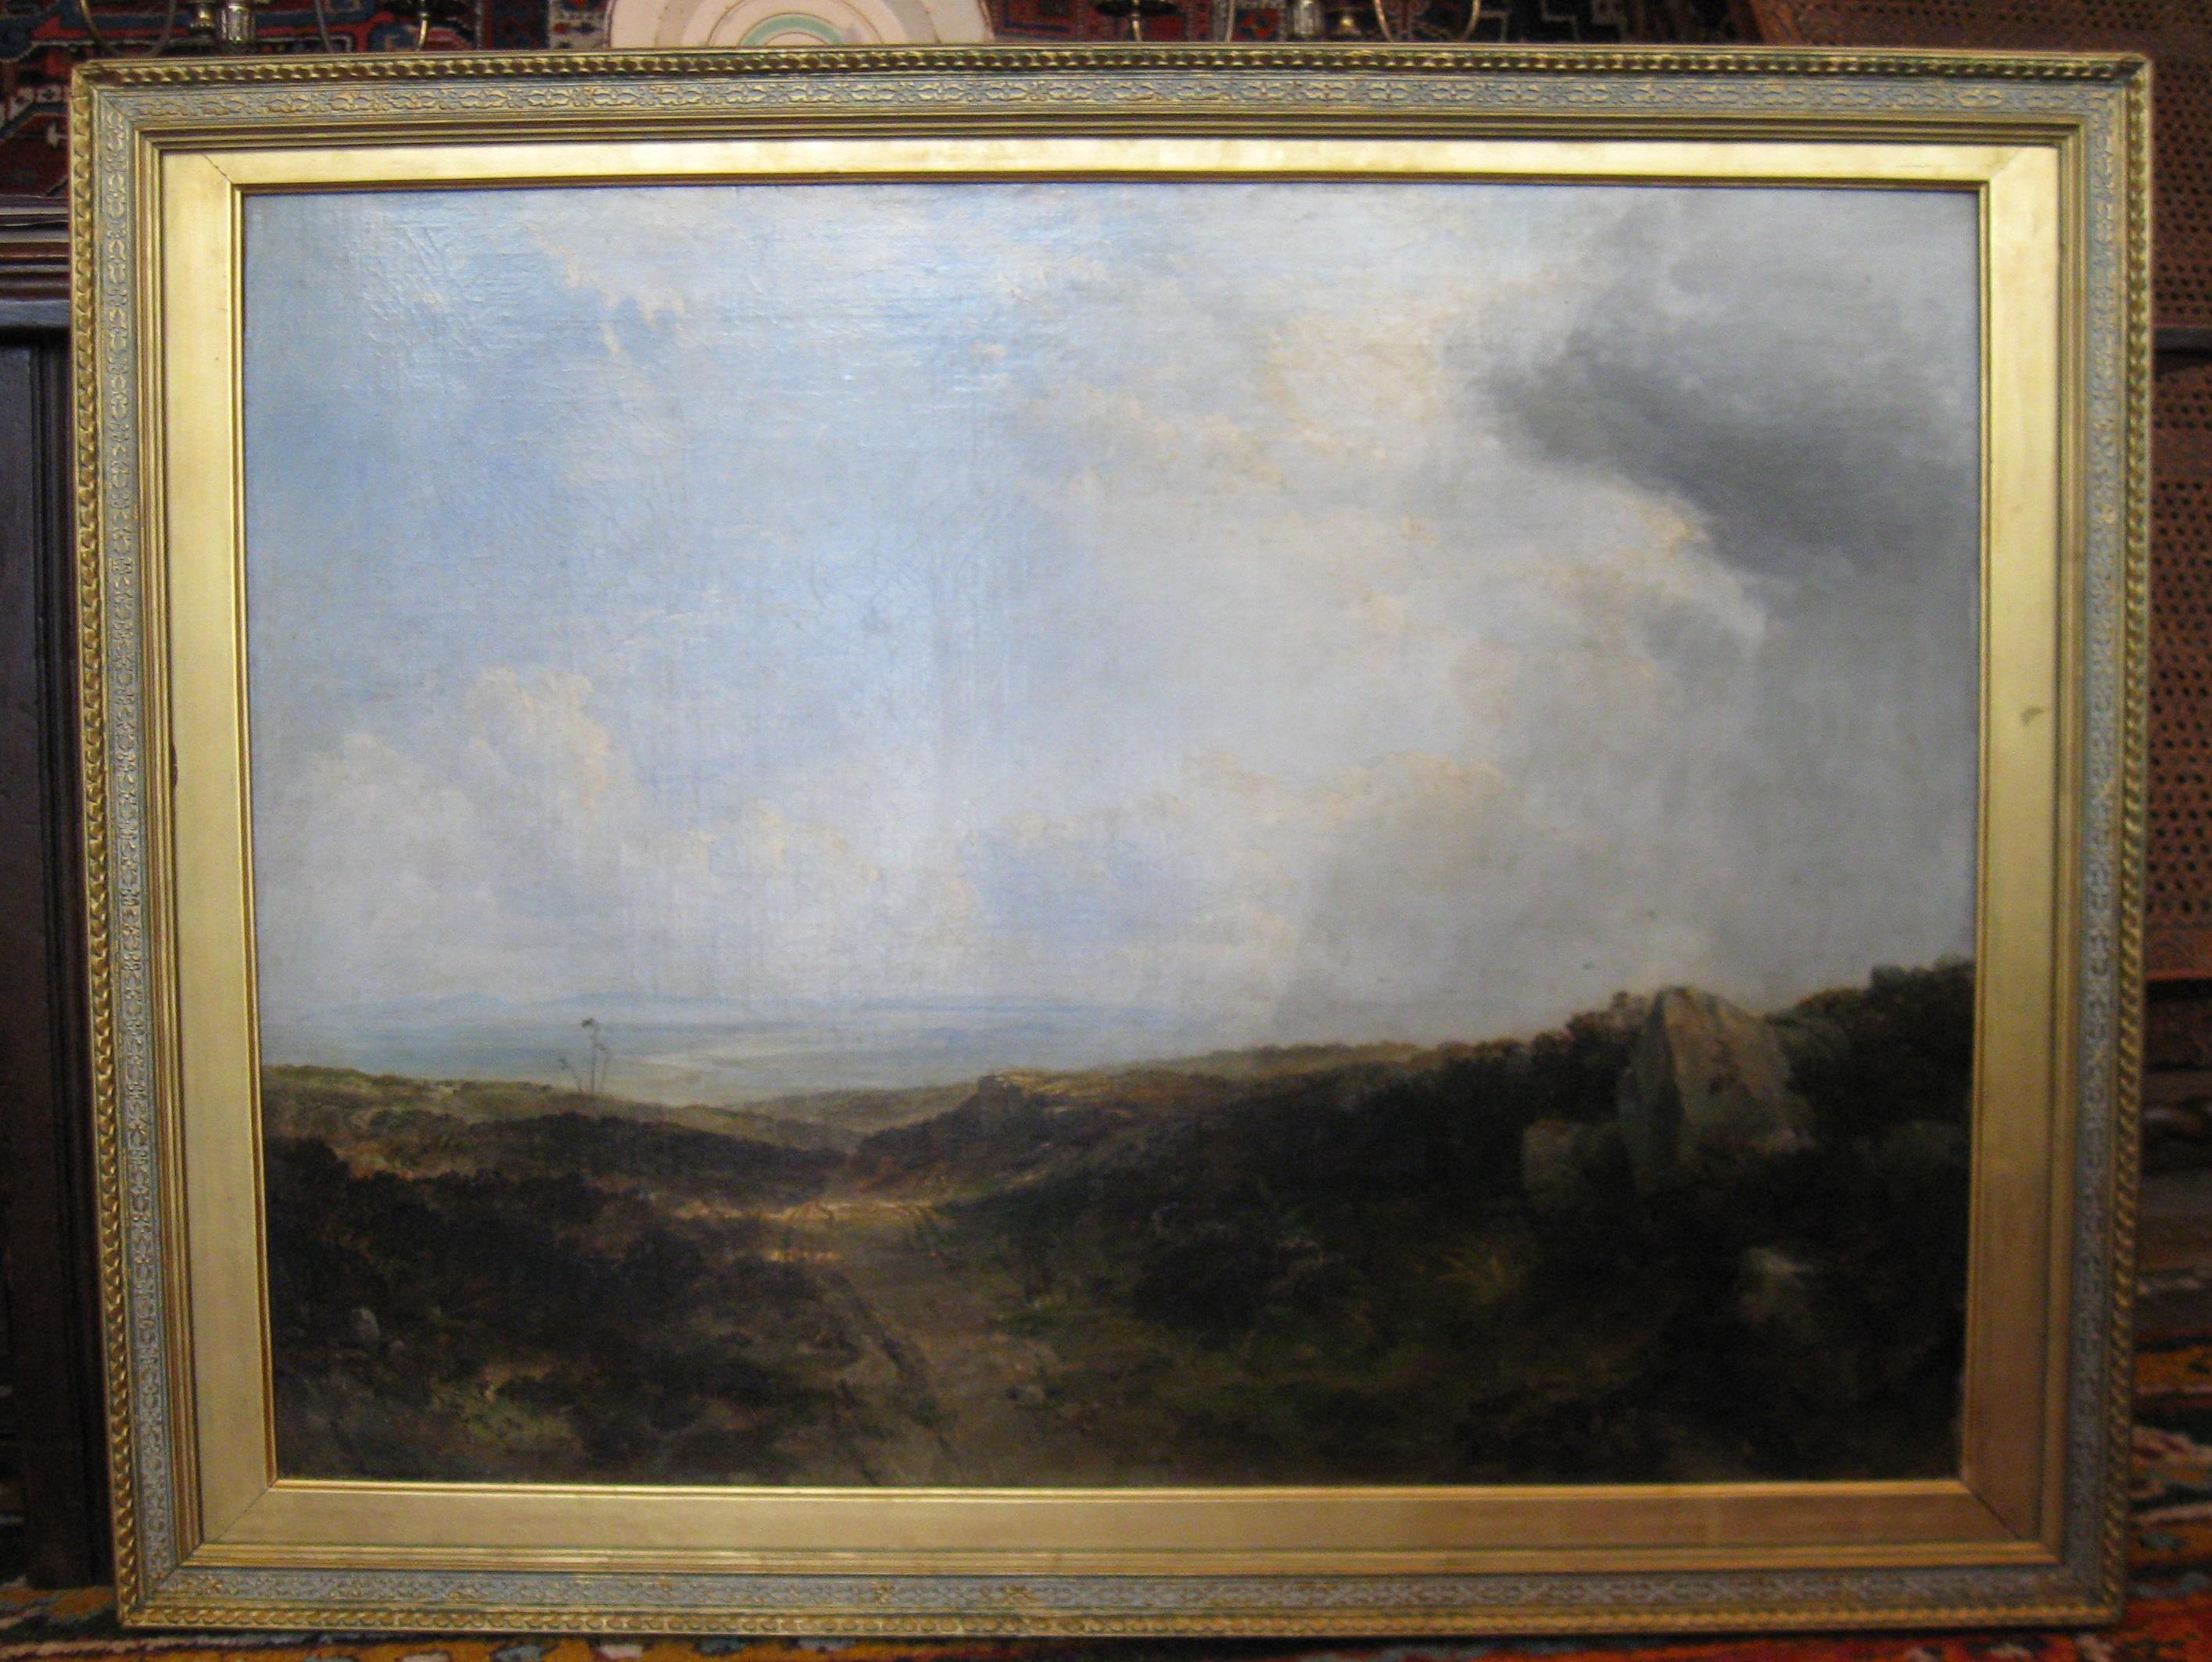 Extensive Moorland Landscape large 19th Century Oil - Painting by Thomas Creswick